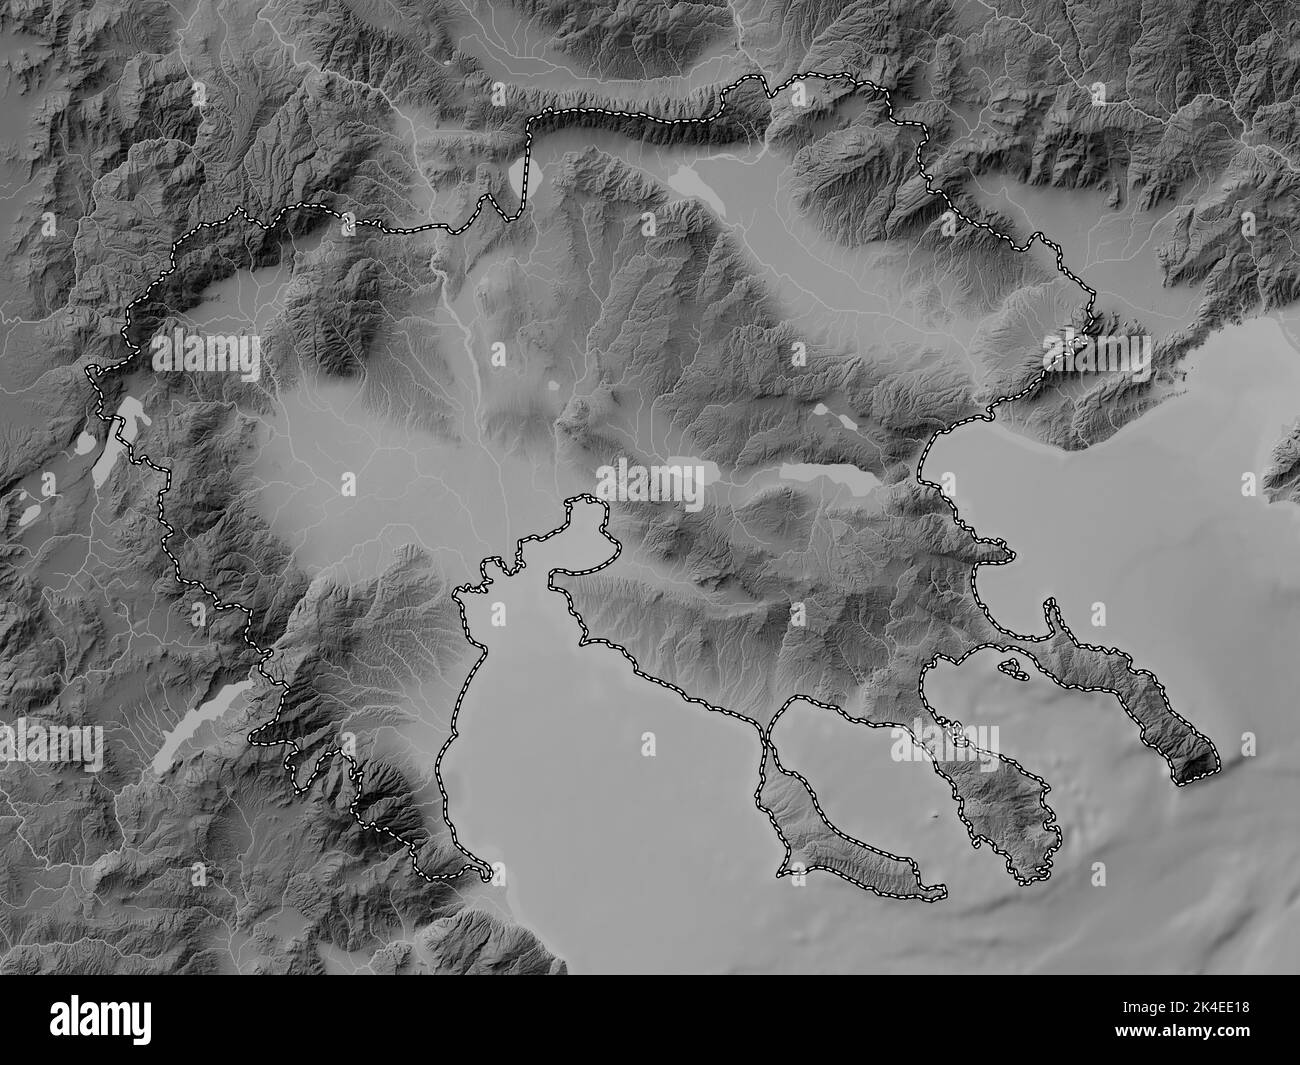 Central Macedonia, decentralized administration of Greece. Grayscale elevation map with lakes and rivers Stock Photo